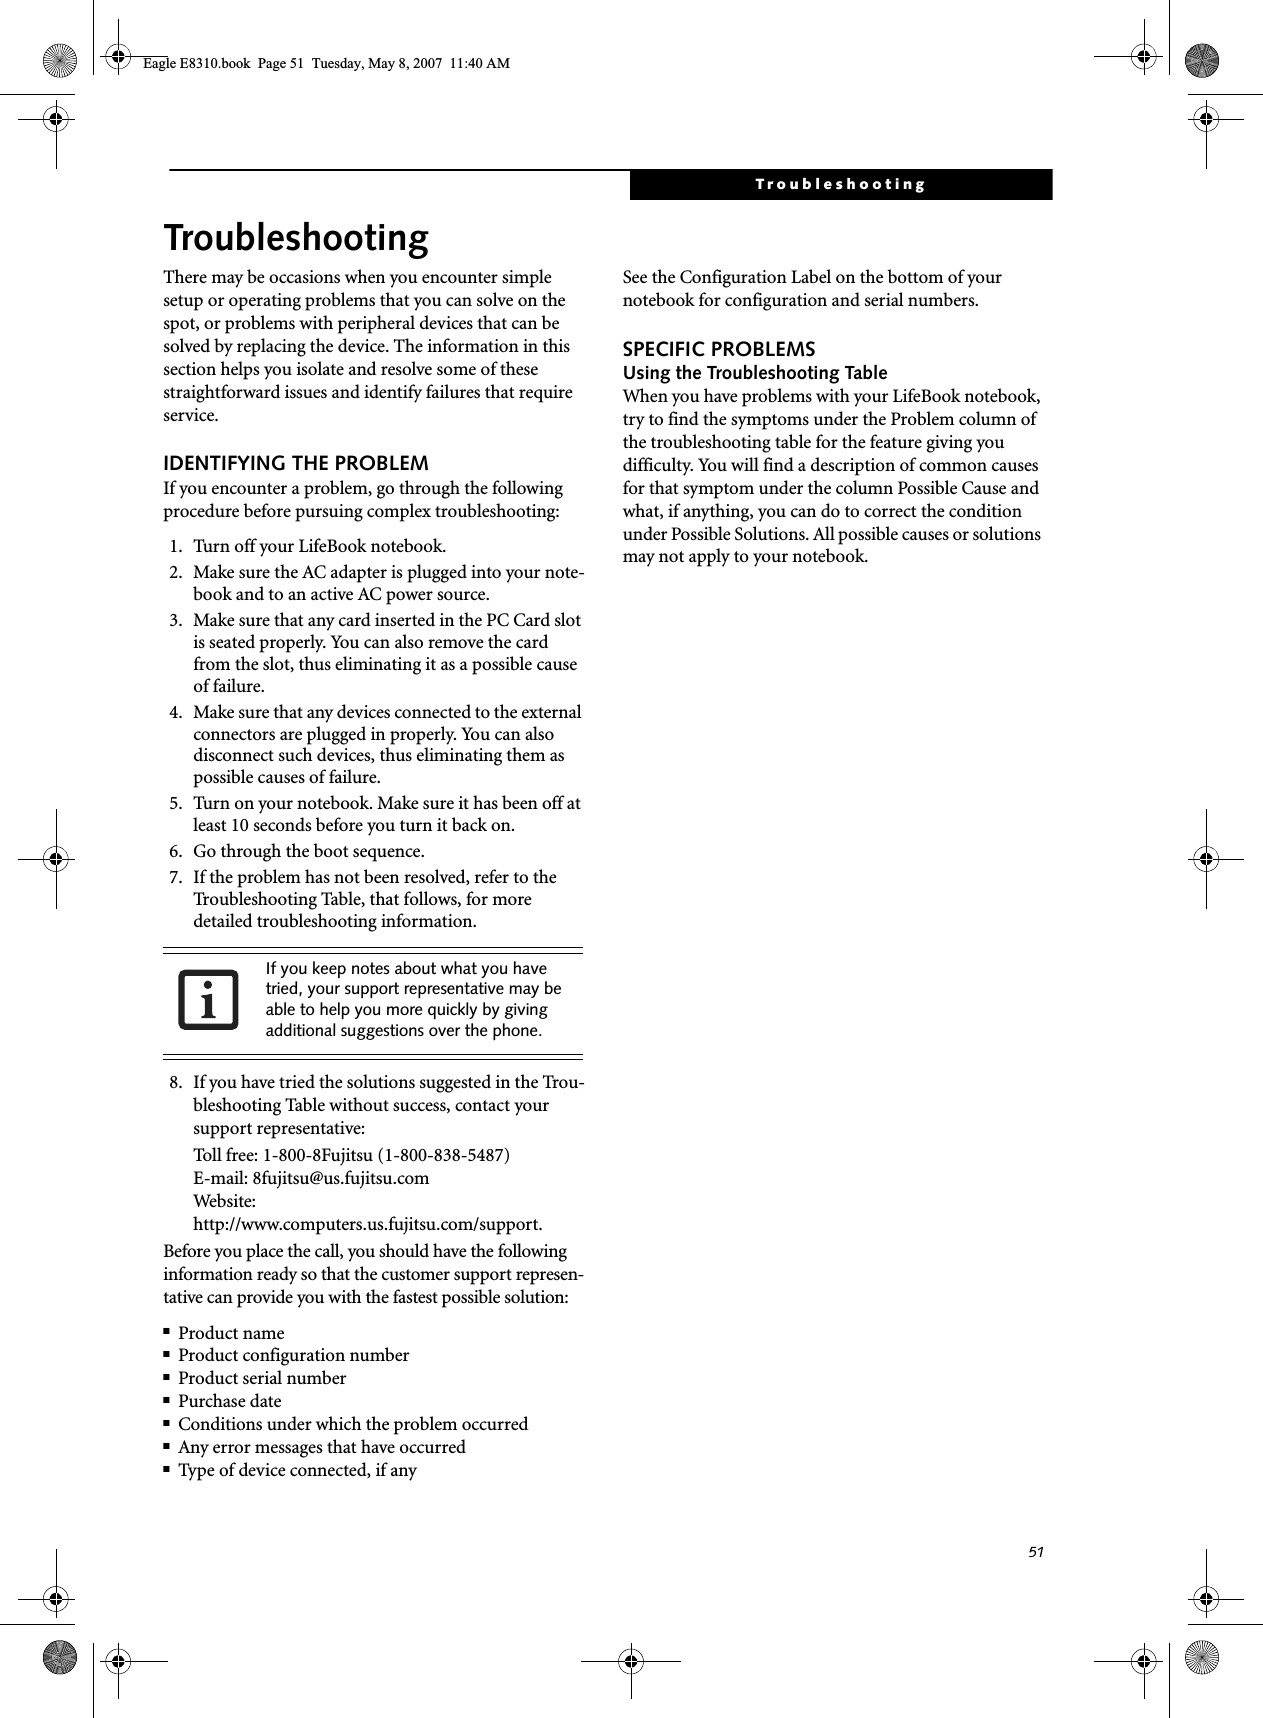 51TroubleshootingTroubleshootingThere may be occasions when you encounter simple setup or operating problems that you can solve on the spot, or problems with peripheral devices that can be solved by replacing the device. The information in this section helps you isolate and resolve some of these straightforward issues and identify failures that require service.IDENTIFYING THE PROBLEMIf you encounter a problem, go through the following procedure before pursuing complex troubleshooting:1. Turn off your LifeBook notebook.2. Make sure the AC adapter is plugged into your note-book and to an active AC power source.3. Make sure that any card inserted in the PC Card slot is seated properly. You can also remove the card from the slot, thus eliminating it as a possible cause of failure.4. Make sure that any devices connected to the external connectors are plugged in properly. You can also disconnect such devices, thus eliminating them as possible causes of failure.5. Turn on your notebook. Make sure it has been off at least 10 seconds before you turn it back on.6. Go through the boot sequence.7. If the problem has not been resolved, refer to the Troubleshooting Table, that follows, for more detailed troubleshooting information. 8. If you have tried the solutions suggested in the Trou-bleshooting Table without success, contact your support representative: Toll free: 1-800-8Fujitsu (1-800-838-5487) E-mail: 8fujitsu@us.fujitsu.com Website: http://www.computers.us.fujitsu.com/support.Before you place the call, you should have the following information ready so that the customer support represen-tative can provide you with the fastest possible solution:■Product name■Product configuration number■Product serial number■Purchase date■Conditions under which the problem occurred■Any error messages that have occurred■Type of device connected, if anySee the Configuration Label on the bottom of yournotebook for configuration and serial numbers. SPECIFIC PROBLEMSUsing the Troubleshooting TableWhen you have problems with your LifeBook notebook, try to find the symptoms under the Problem column of the troubleshooting table for the feature giving you difficulty. You will find a description of common causes for that symptom under the column Possible Cause and what, if anything, you can do to correct the condition under Possible Solutions. All possible causes or solutions may not apply to your notebook.If you keep notes about what you have tried, your support representative may be able to help you more quickly by giving additional suggestions over the phone.Eagle E8310.book  Page 51  Tuesday, May 8, 2007  11:40 AM